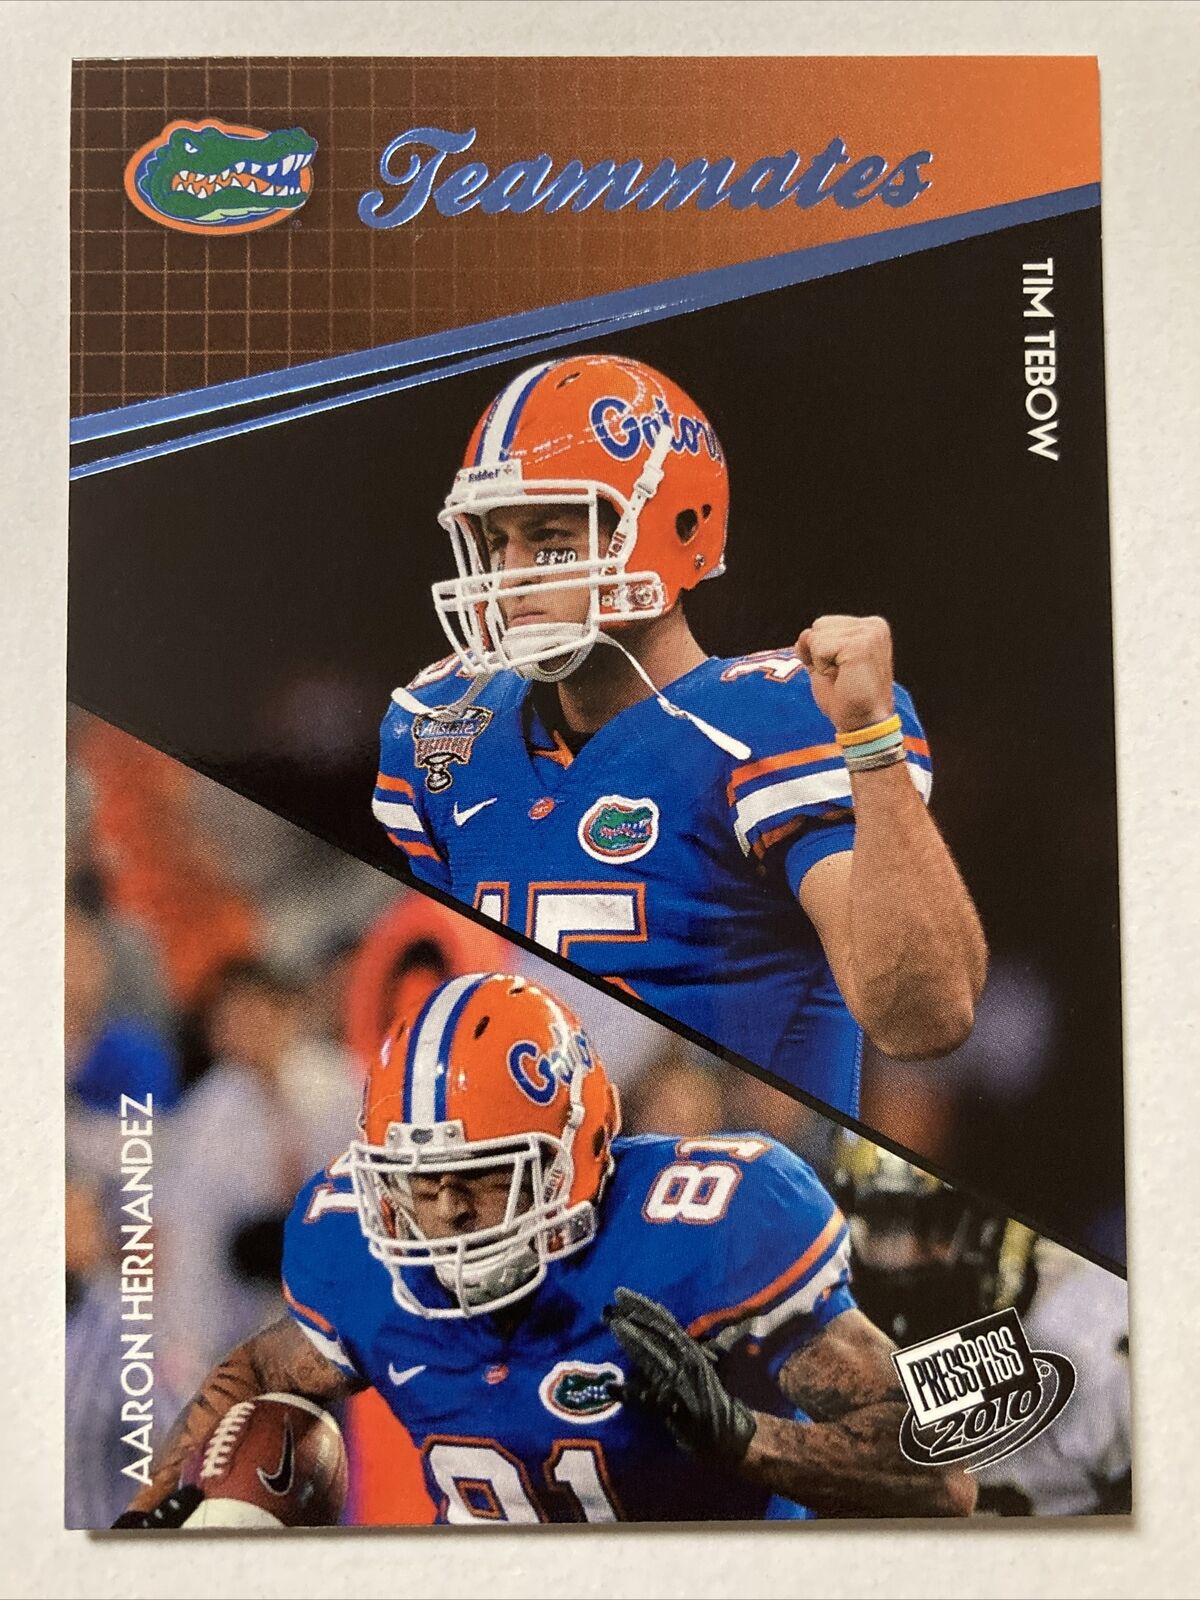 Tim Tebow 2010 Press Pass Teammates Mint ROOKIE Card #94 with Aaron He